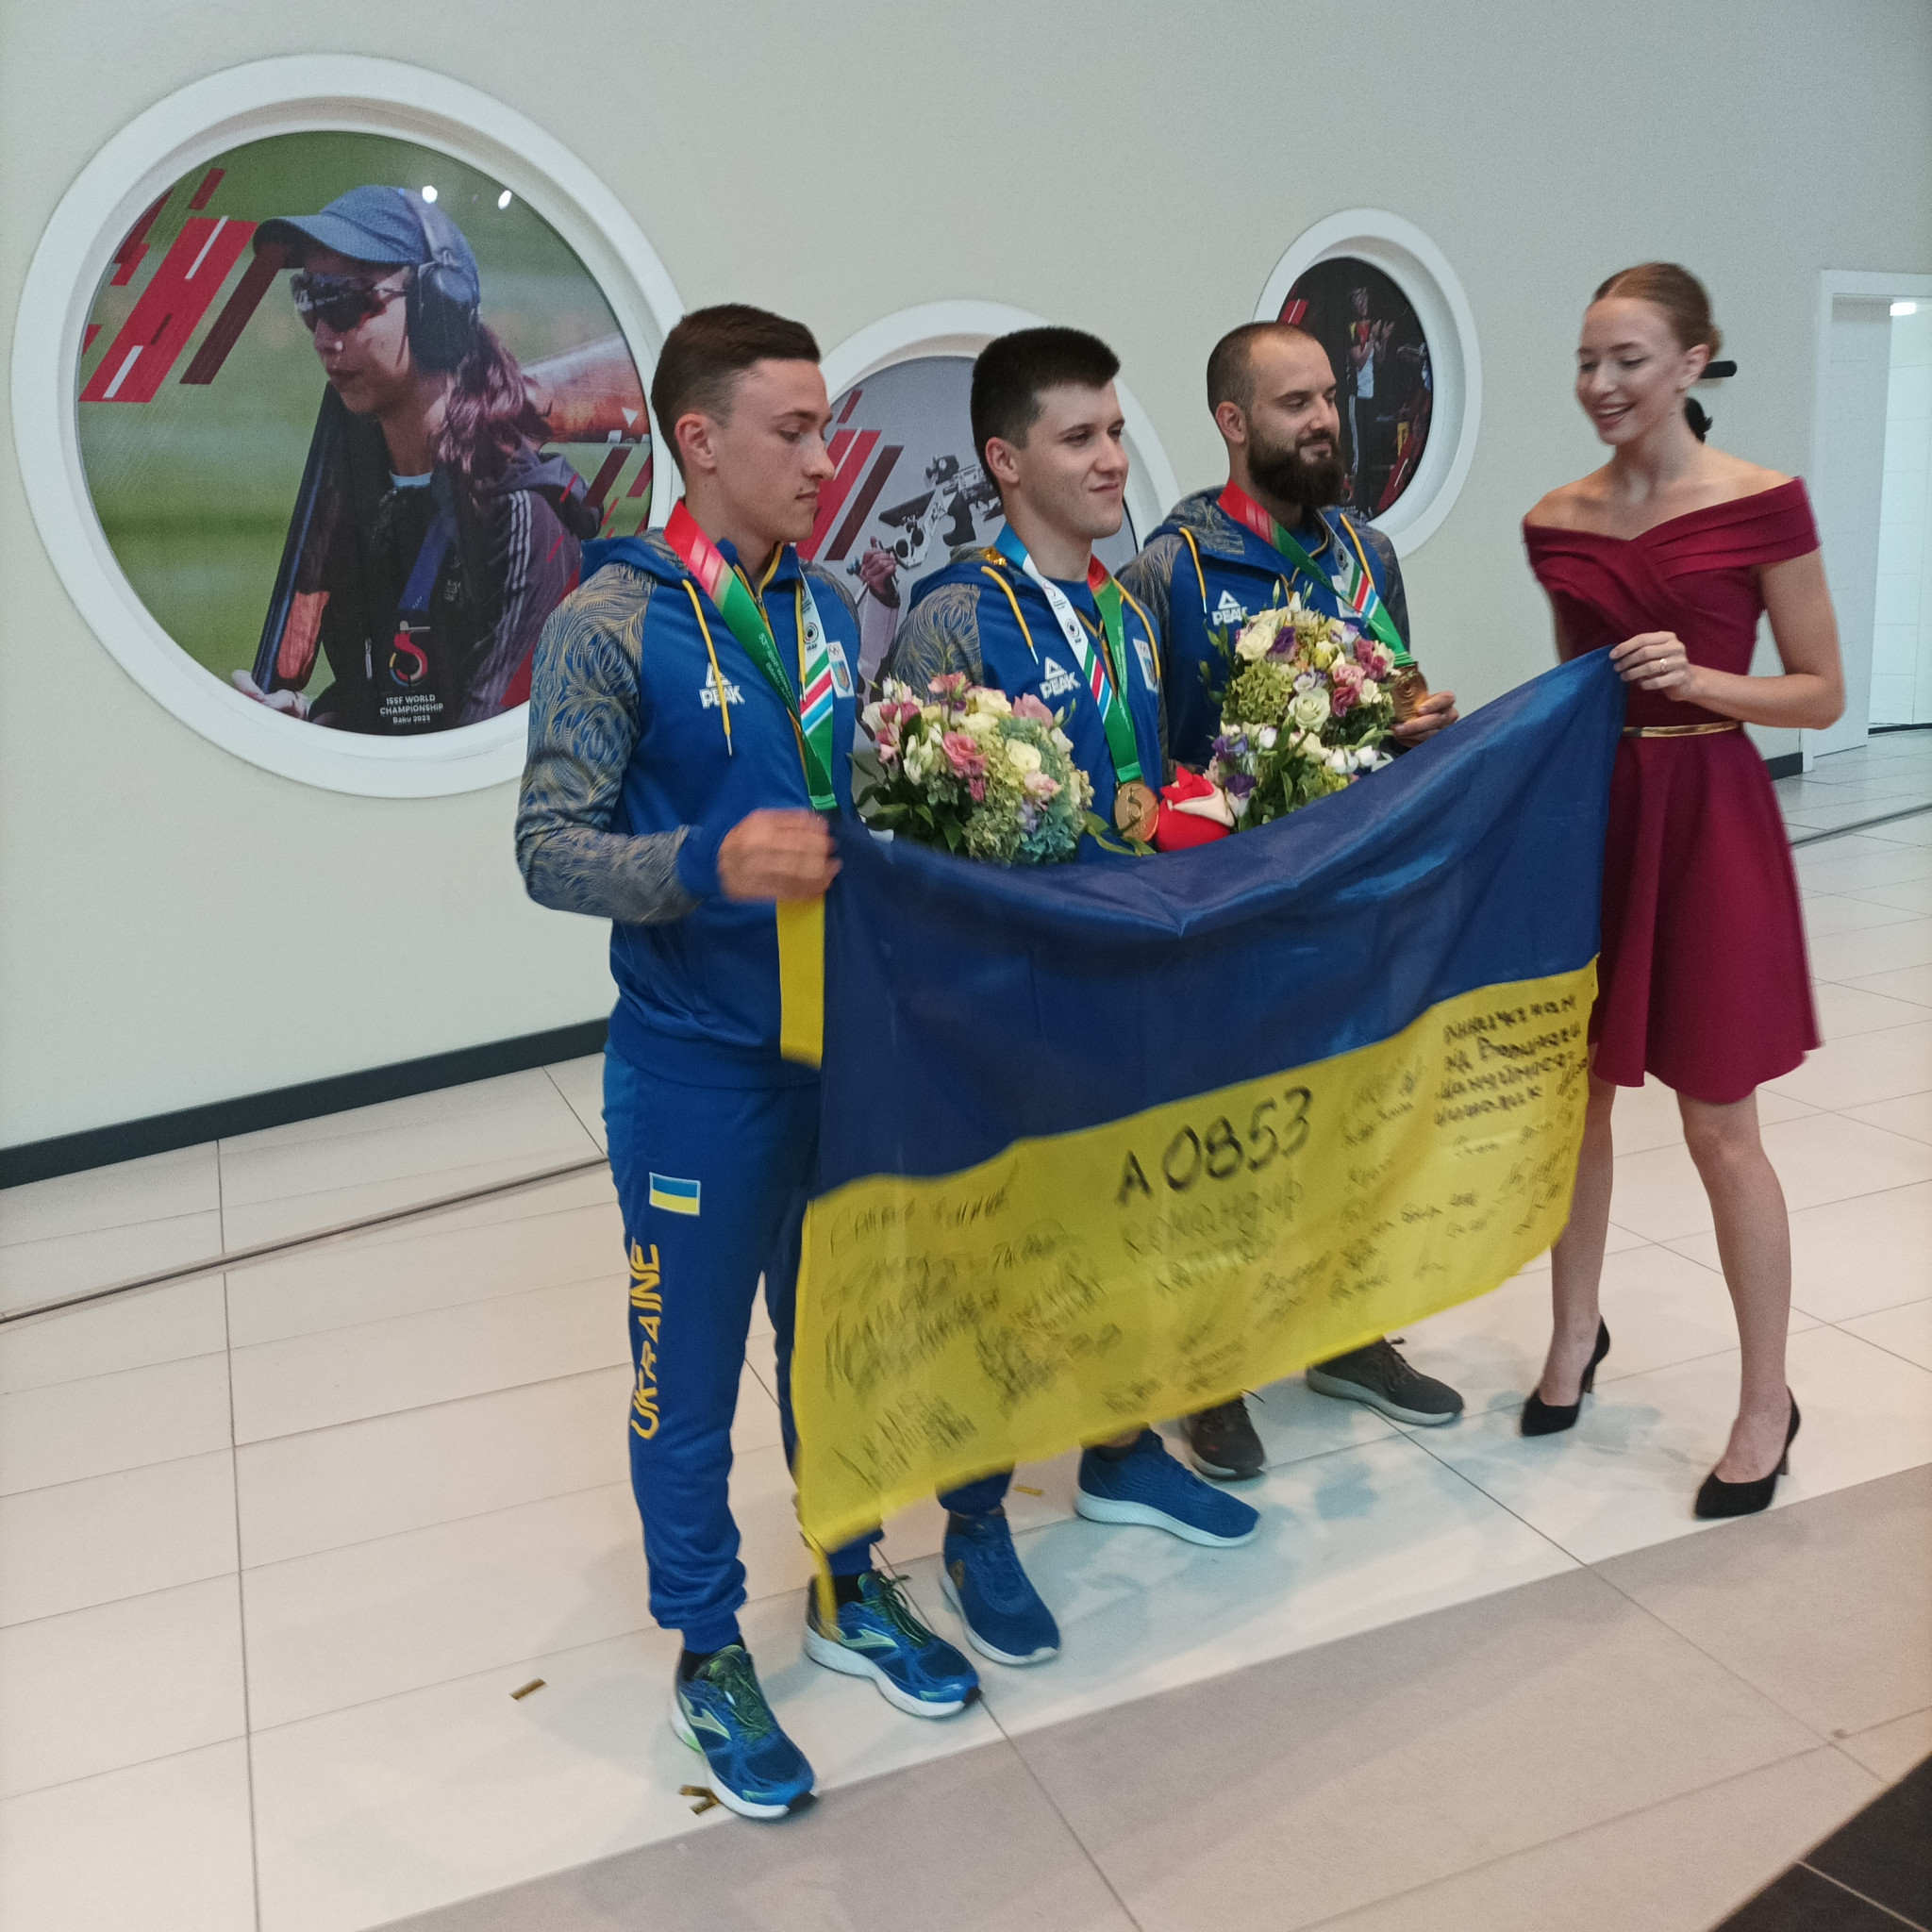 Ukraine celebrate gold medals and display flag with messages from the front at ISSF World Championships